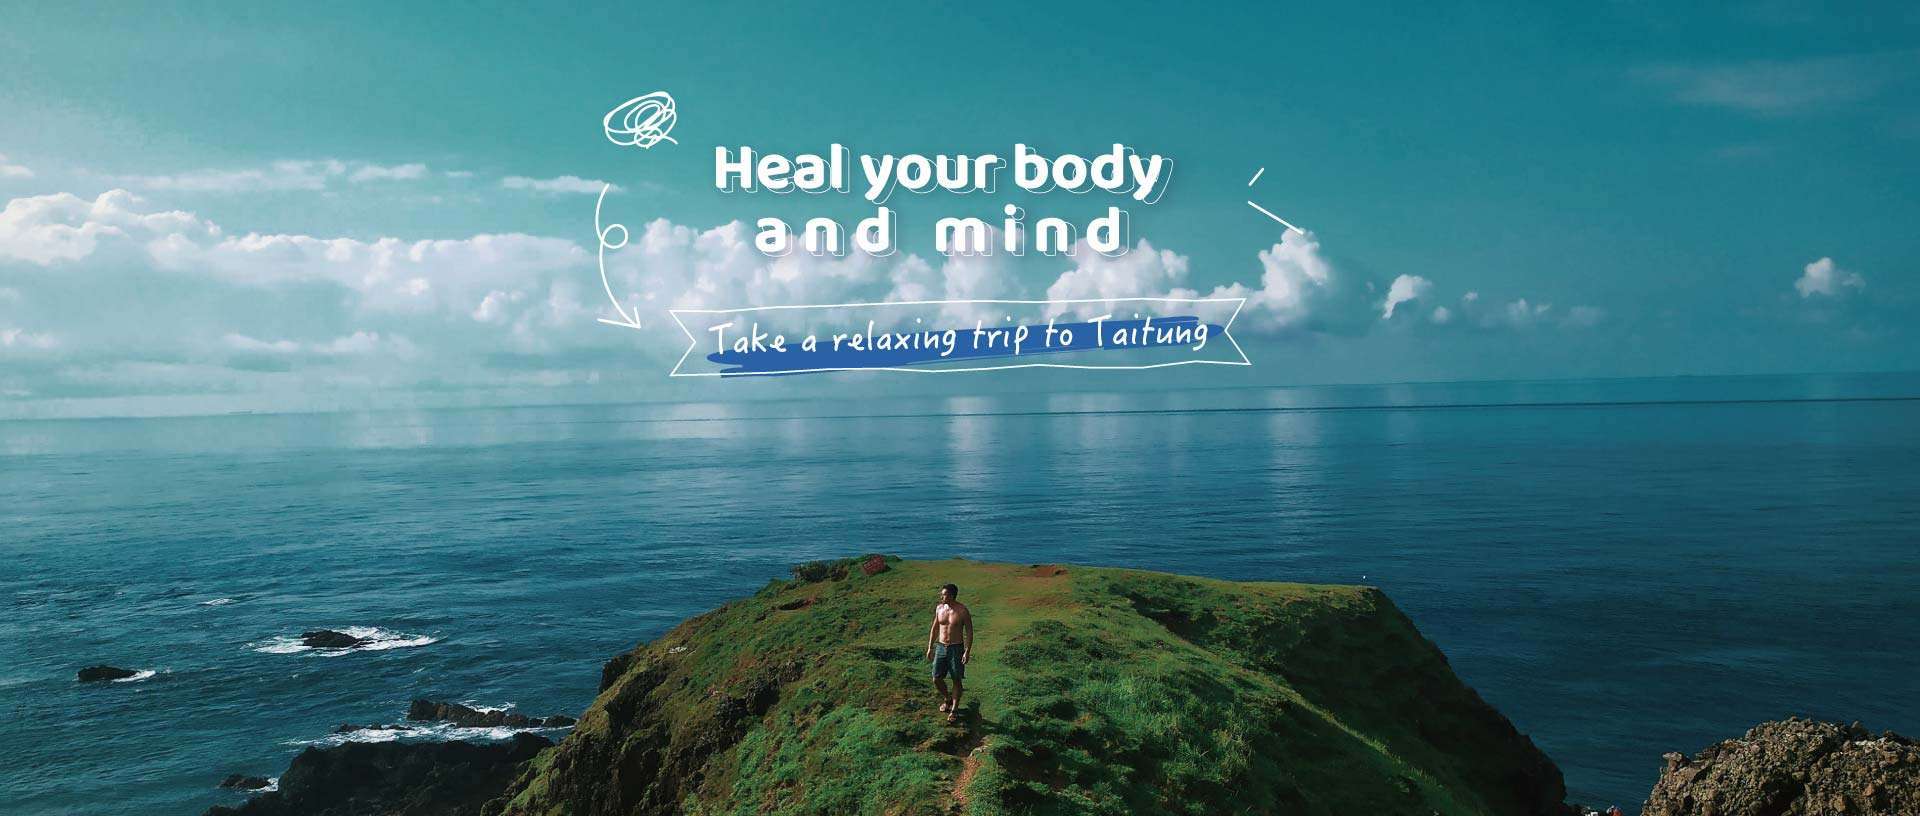 Heal your body and mind